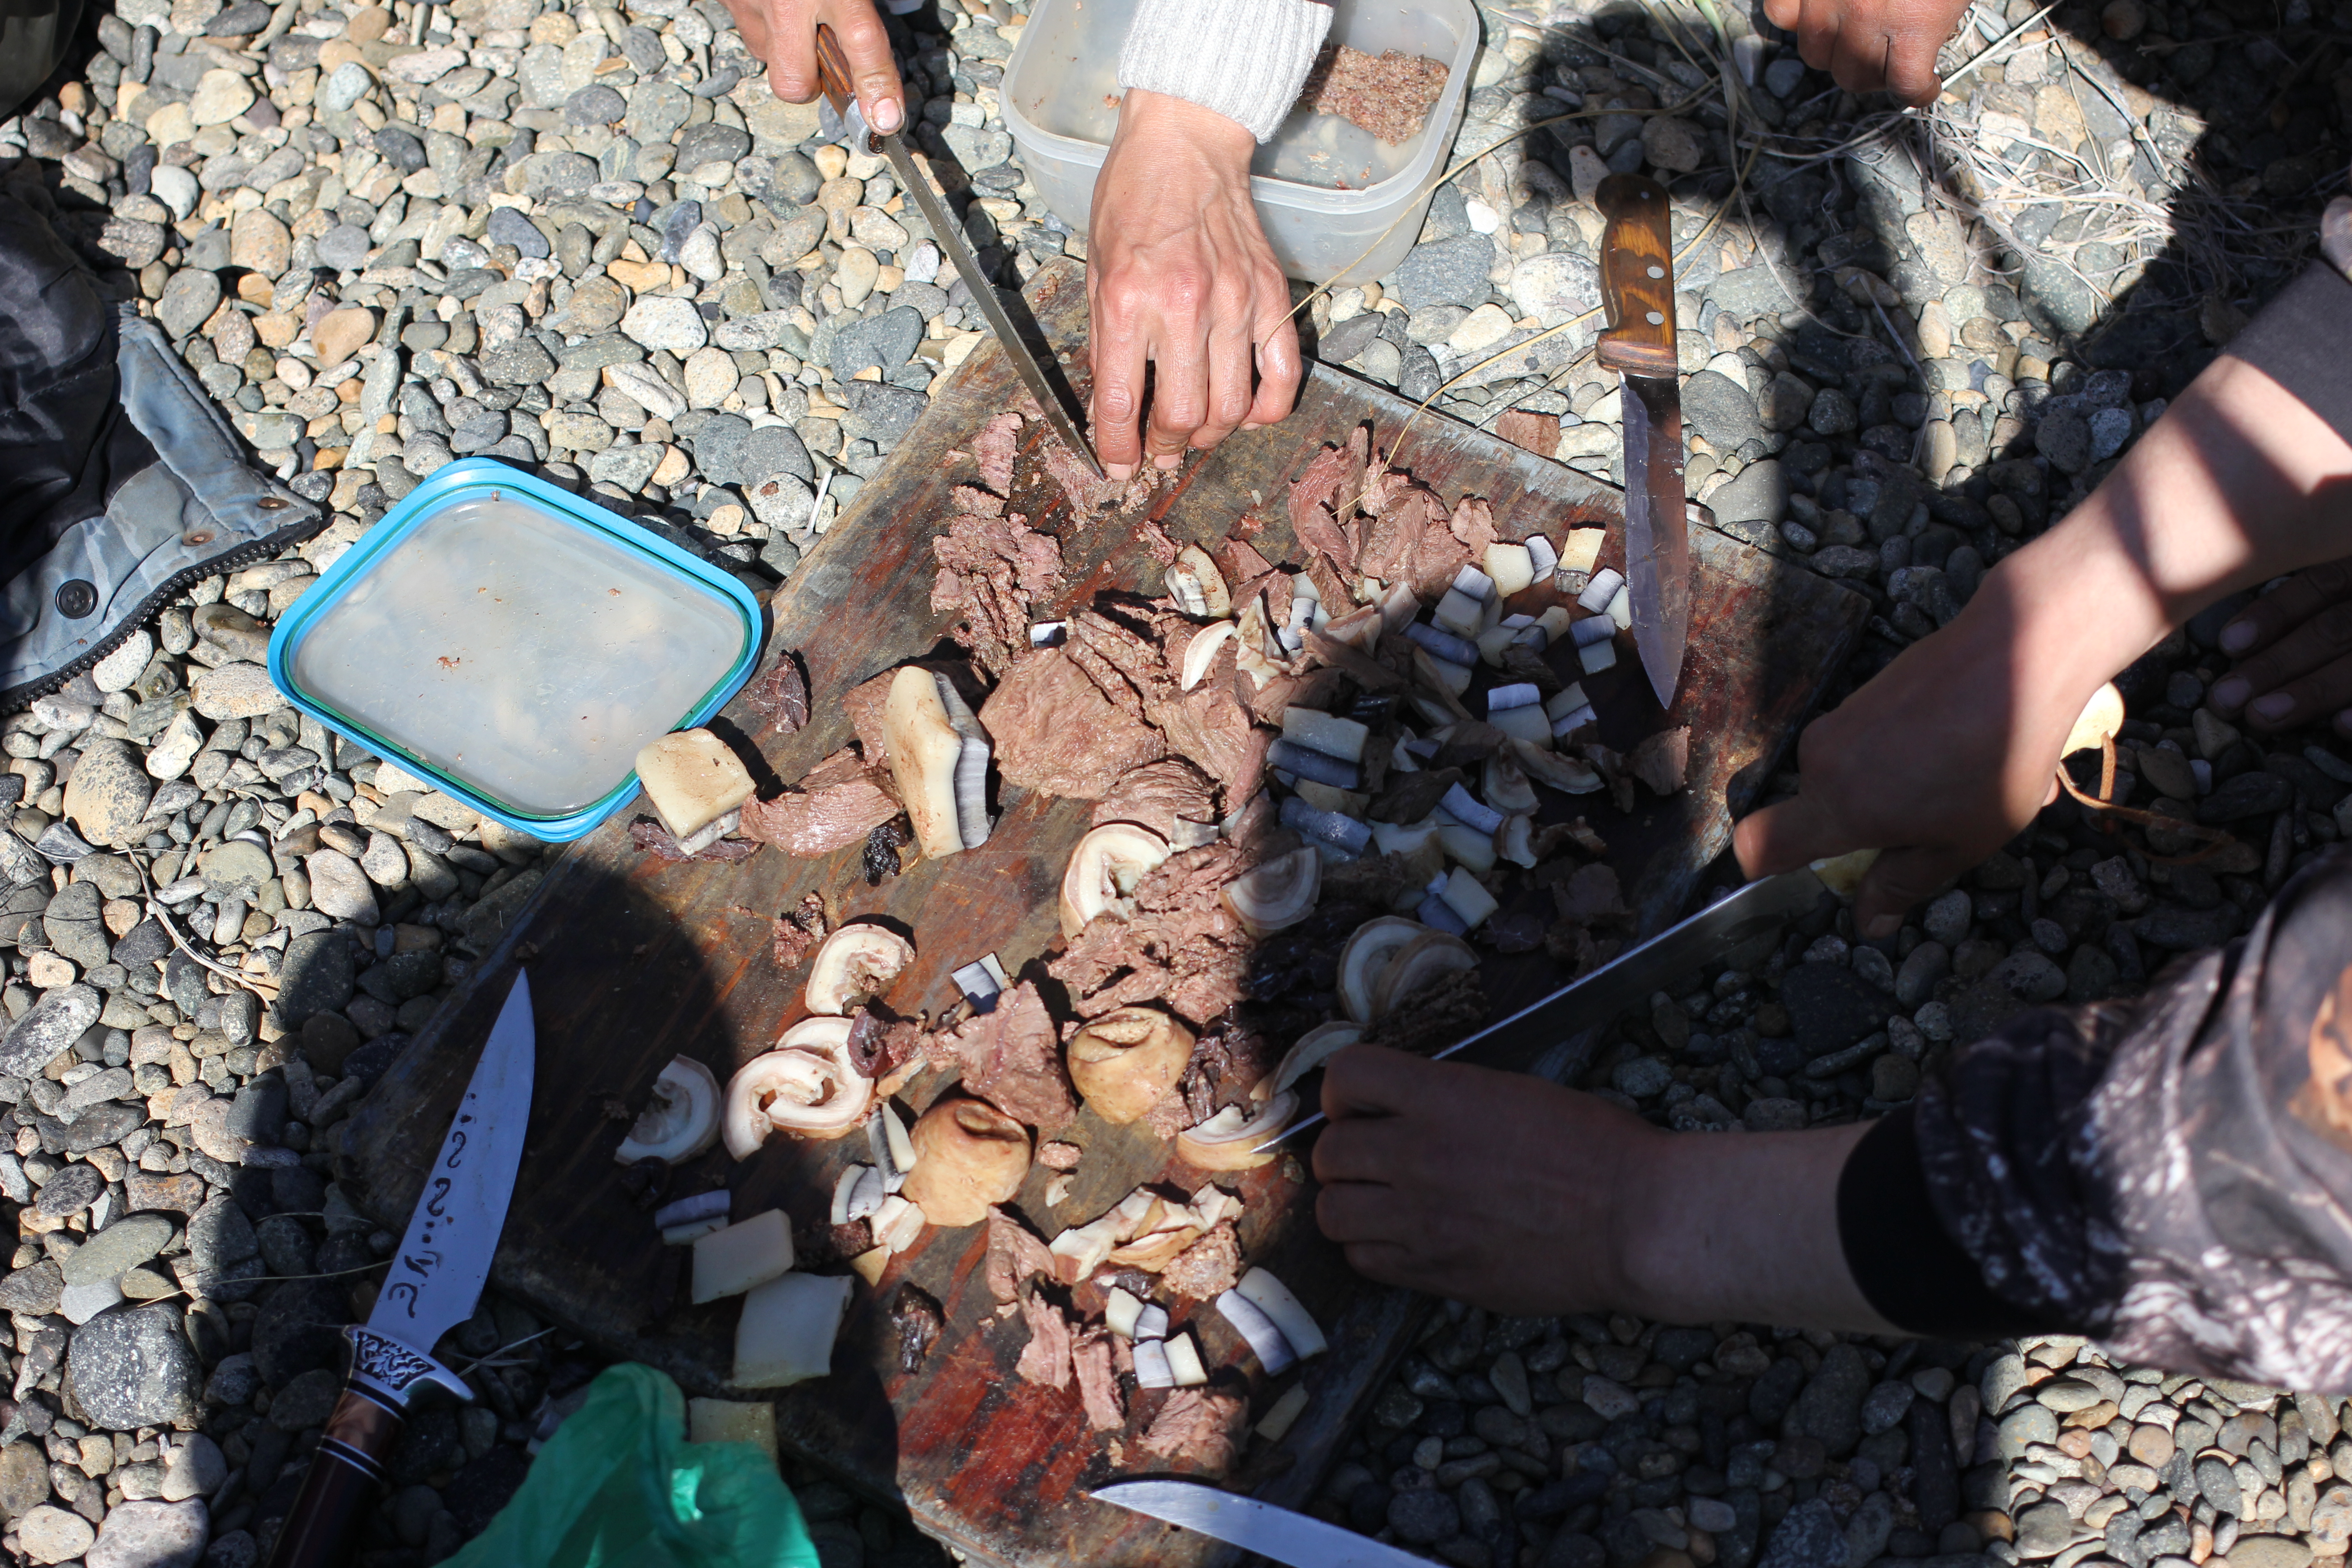 Local guides enjoy a lunch of walrus meat, intestine and gray whale muktuk on the beach along Chukotka’s Bering Strait coast, July 2016. (Kirsten Swann / Alaska Dispatch News)